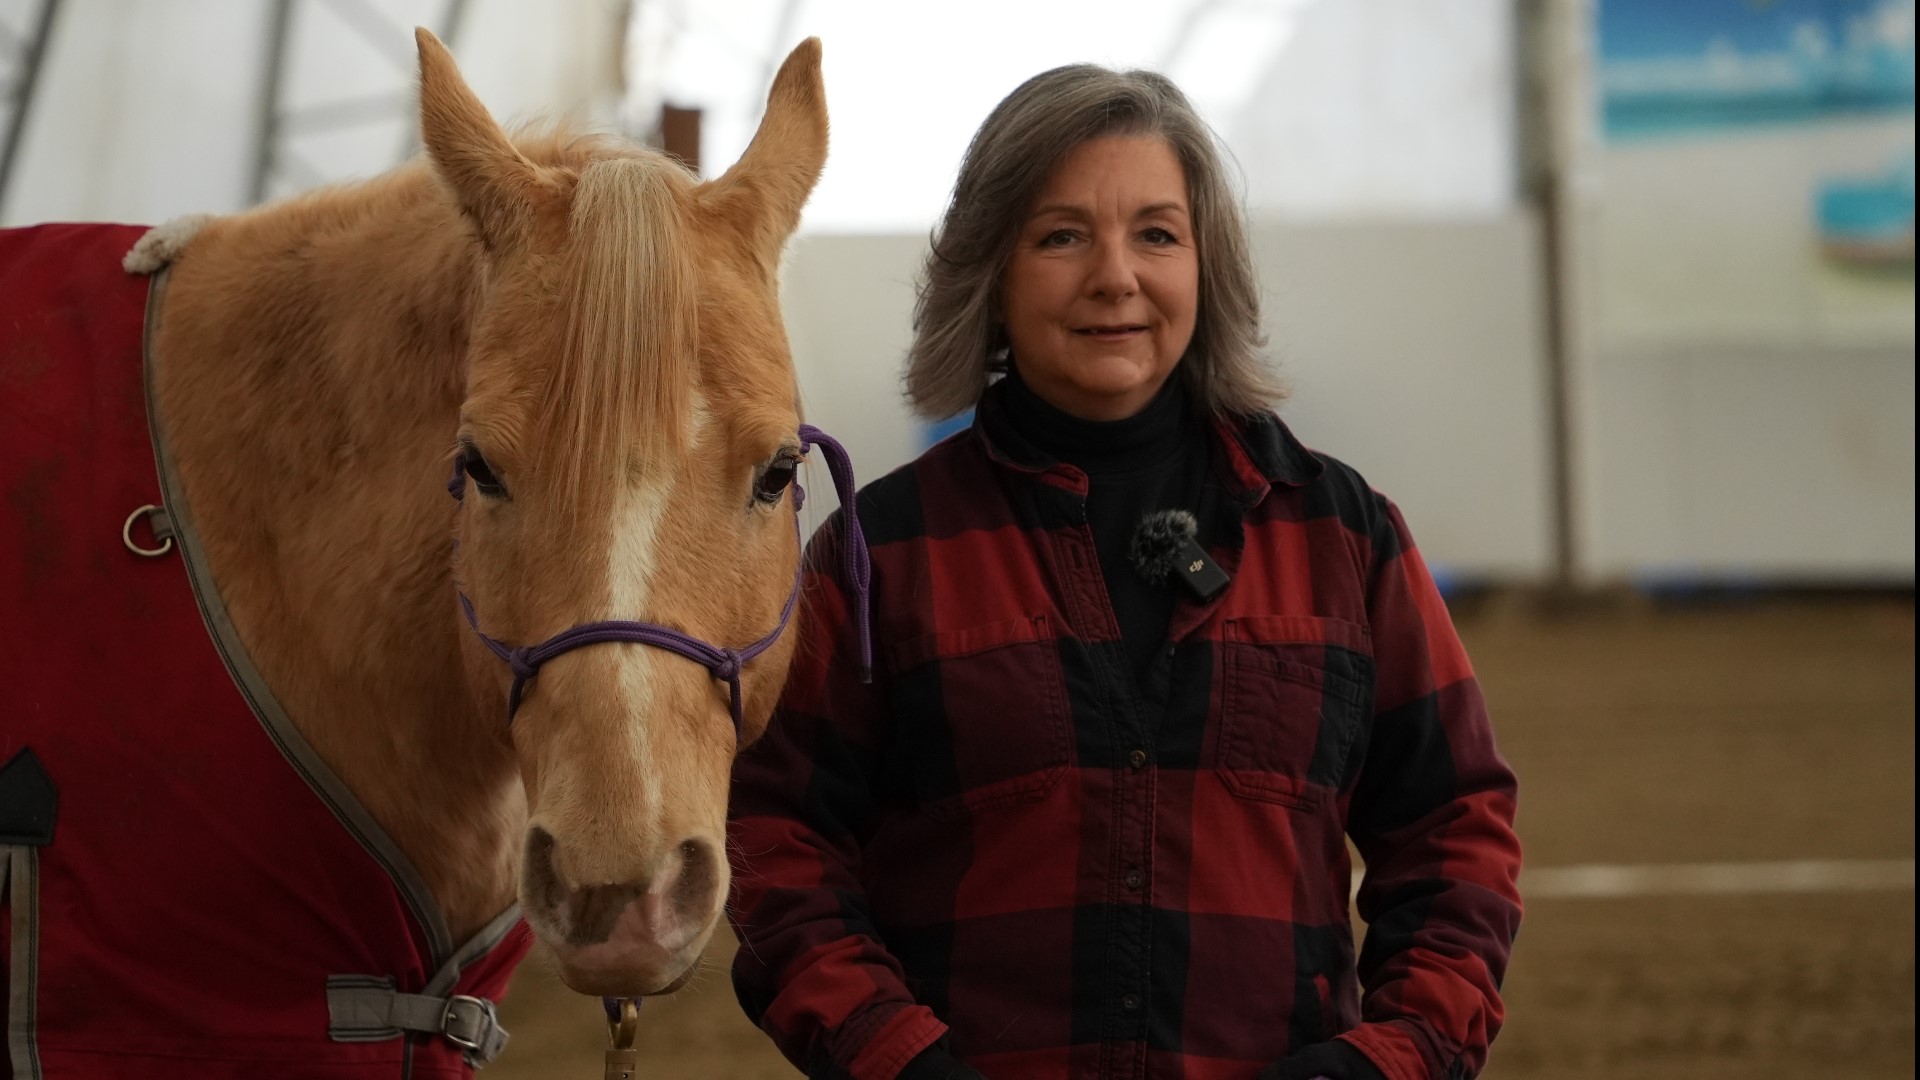 The 20-year-old horse was surrendered in 2021 and now lives with an adopted owner while working with the Travis Mills Foundation.